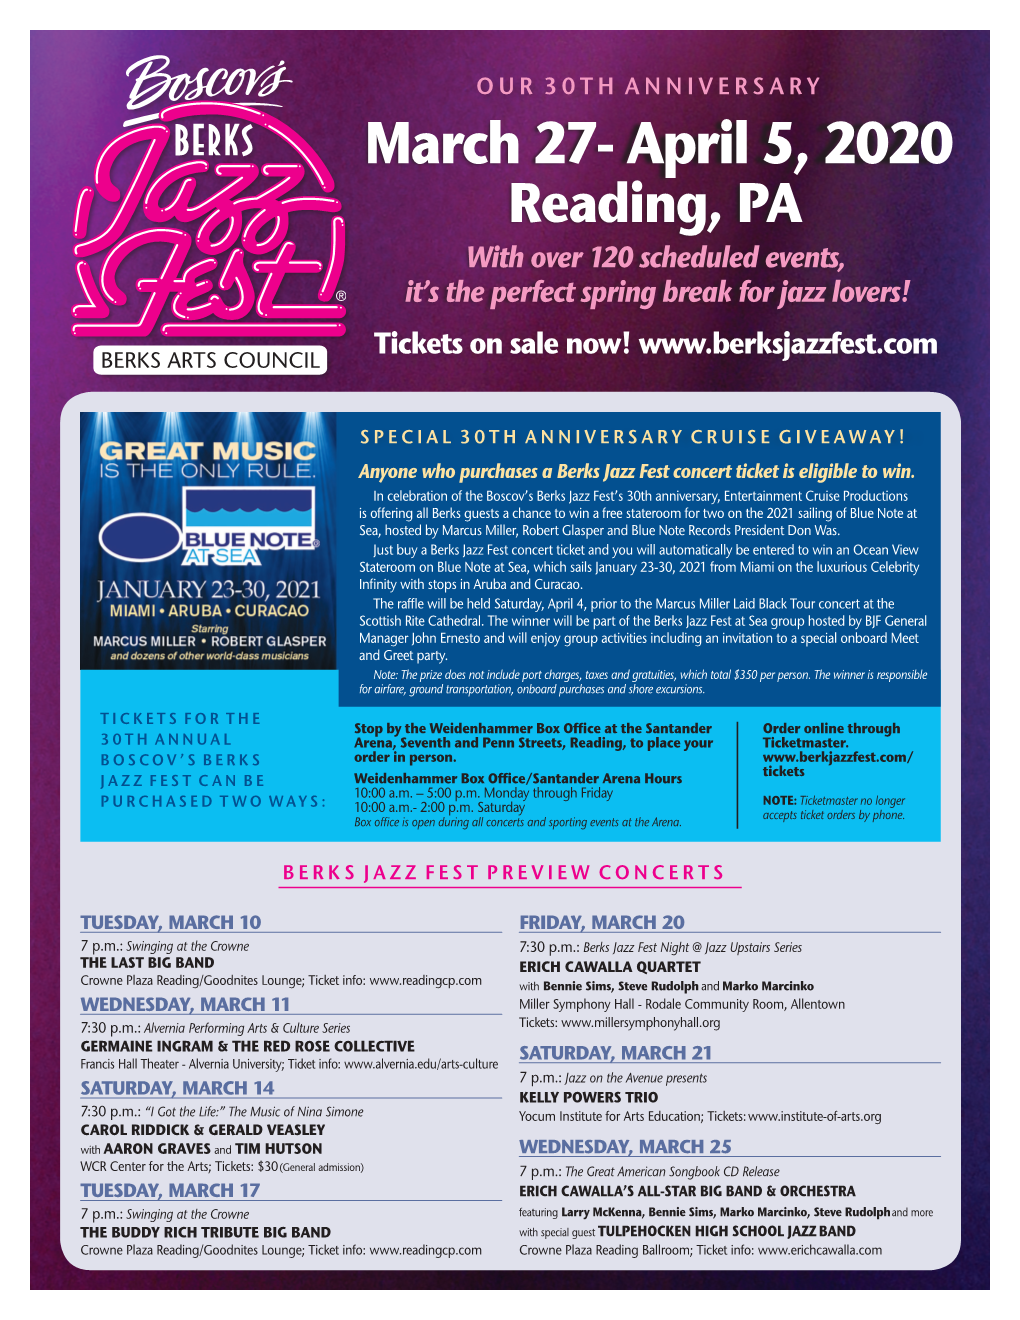 March 27- April 5, 2020 Reading, PA with Over 120 Scheduled Events, It’S the Perfect Spring Break for Jazz Lovers! Tickets on Sale Now!